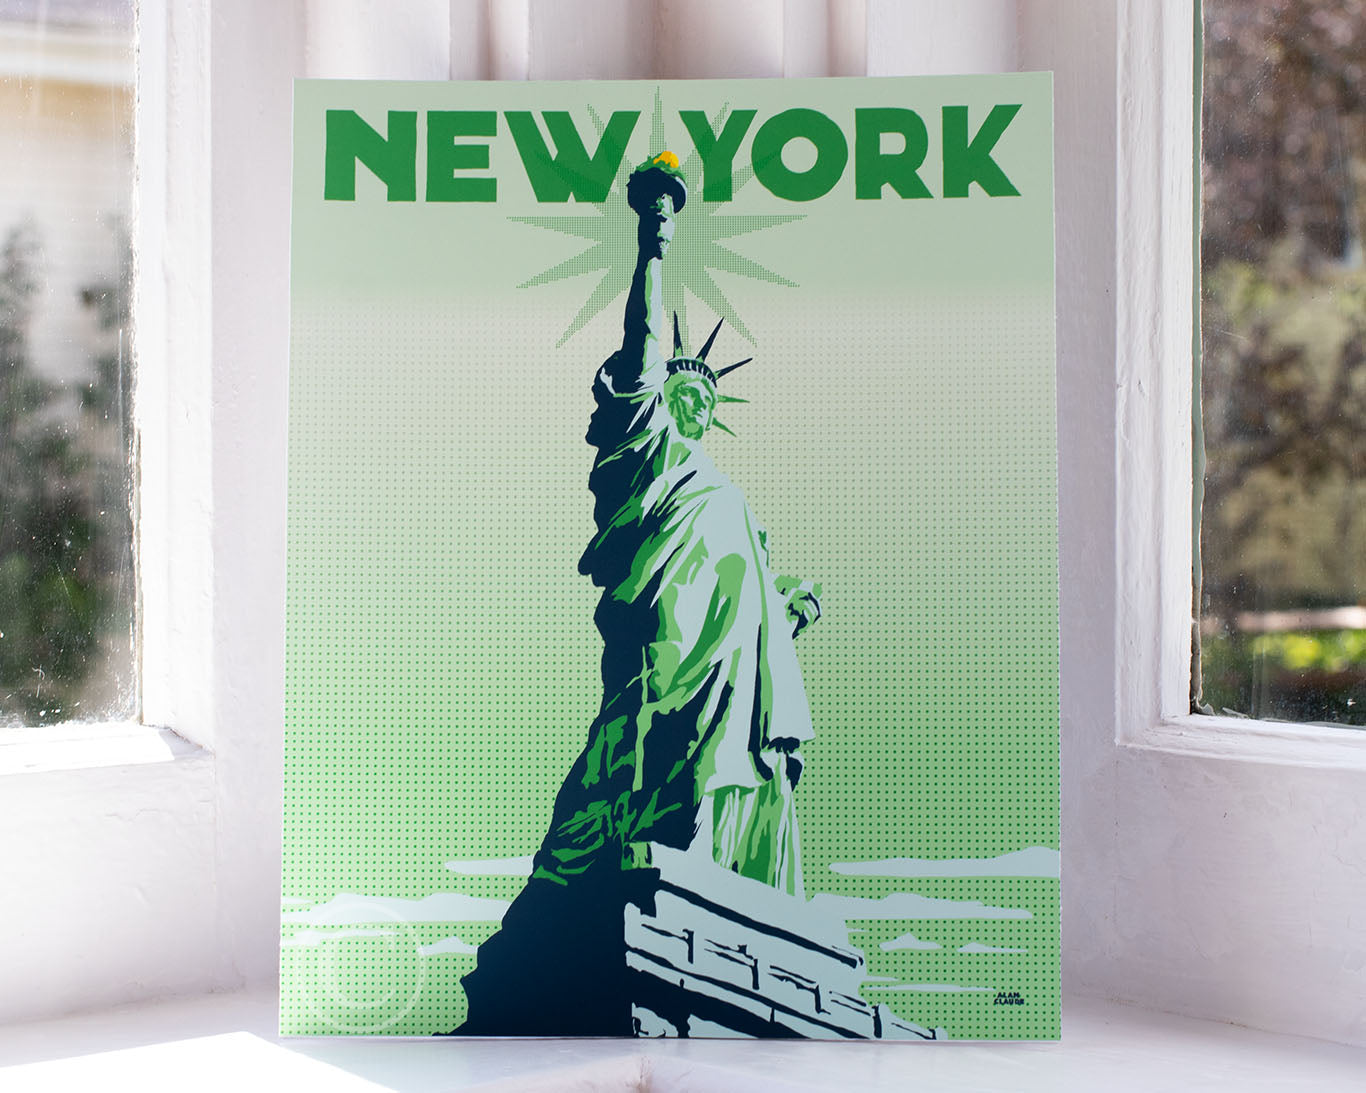 Statue Of Liberty Art Print 8" x 10" Travel Poster By Alan Claude - New York